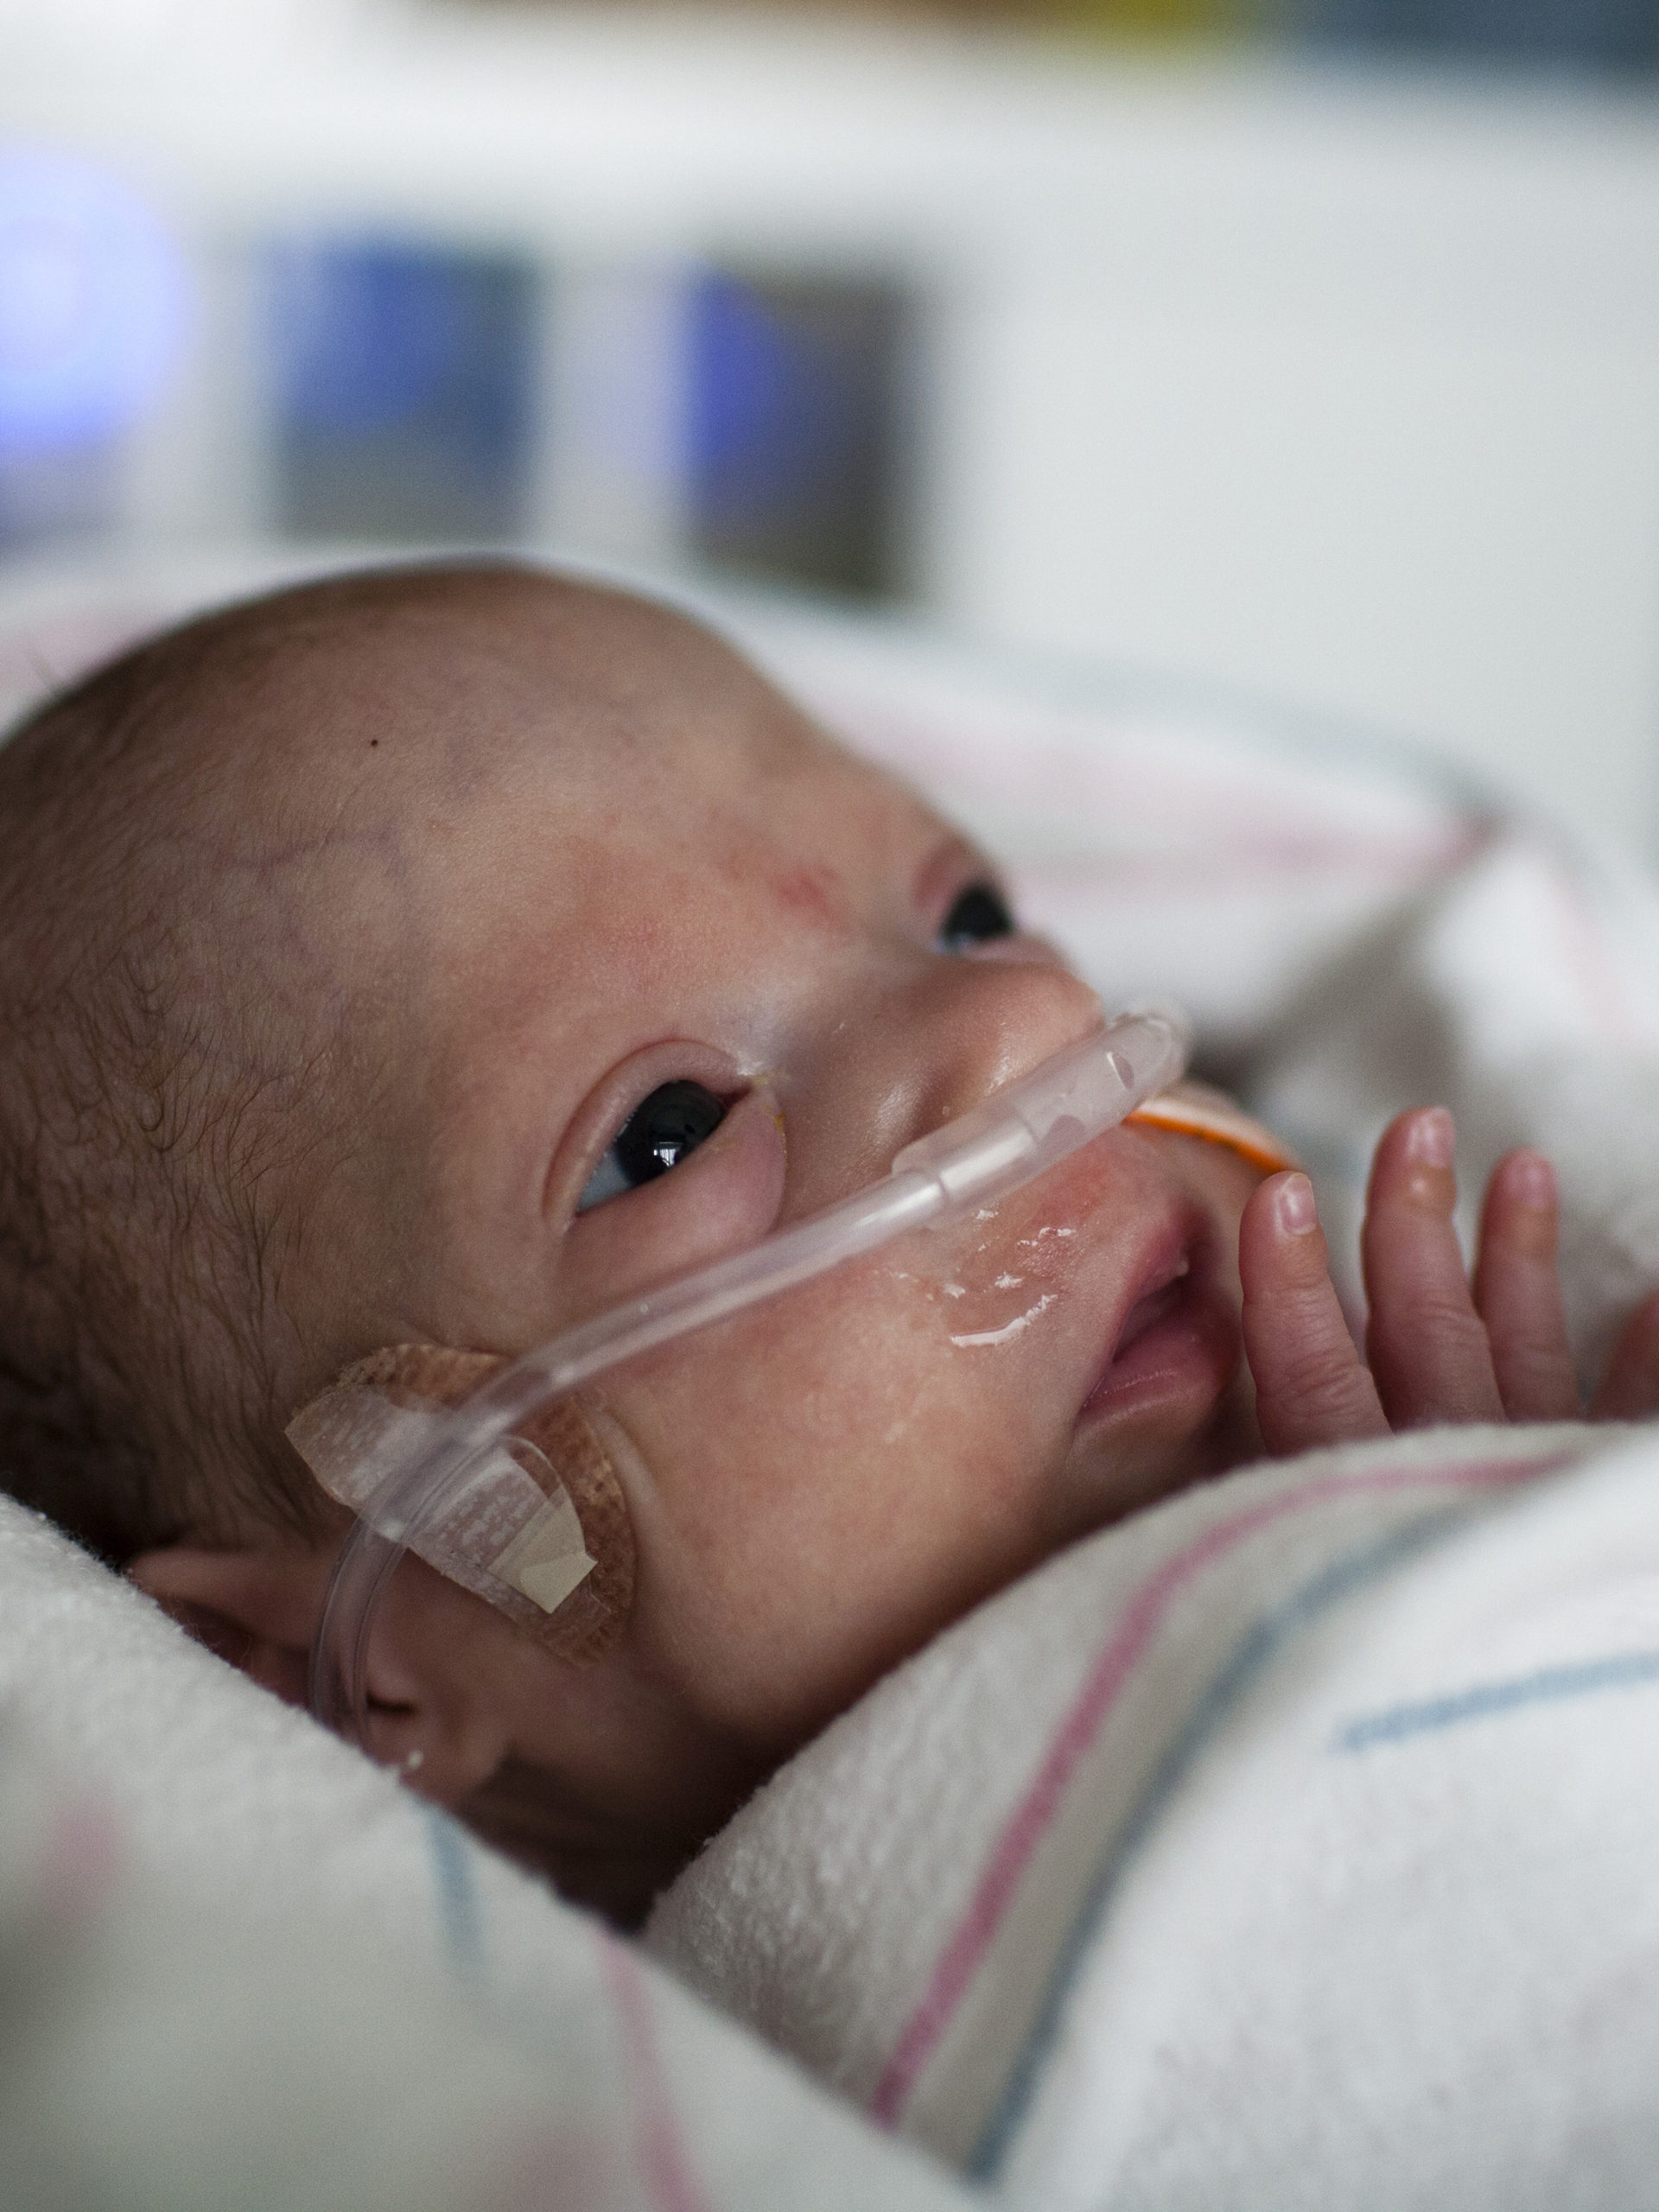 Tiny baby in the NICU with oxygen tube